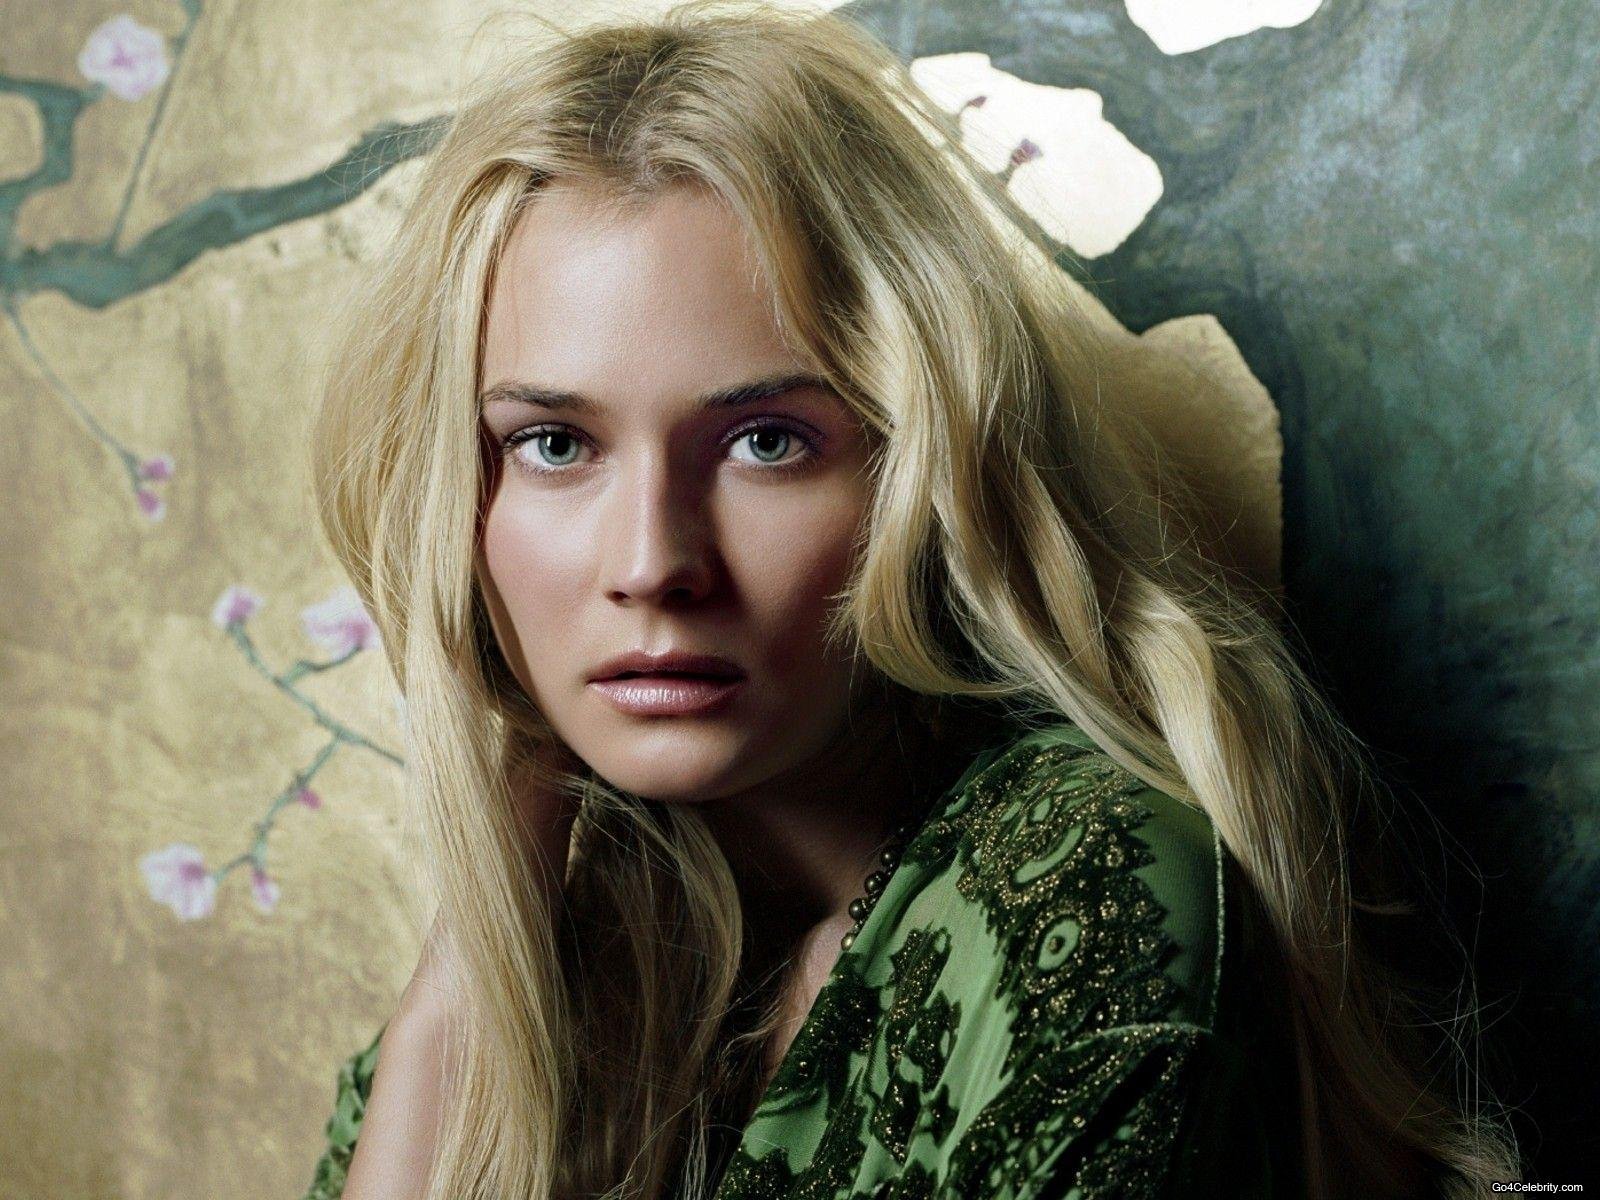 Diane Kruger Wallpaper And Background Image 1600x1200 Id188609 Wallpaper Abyss 